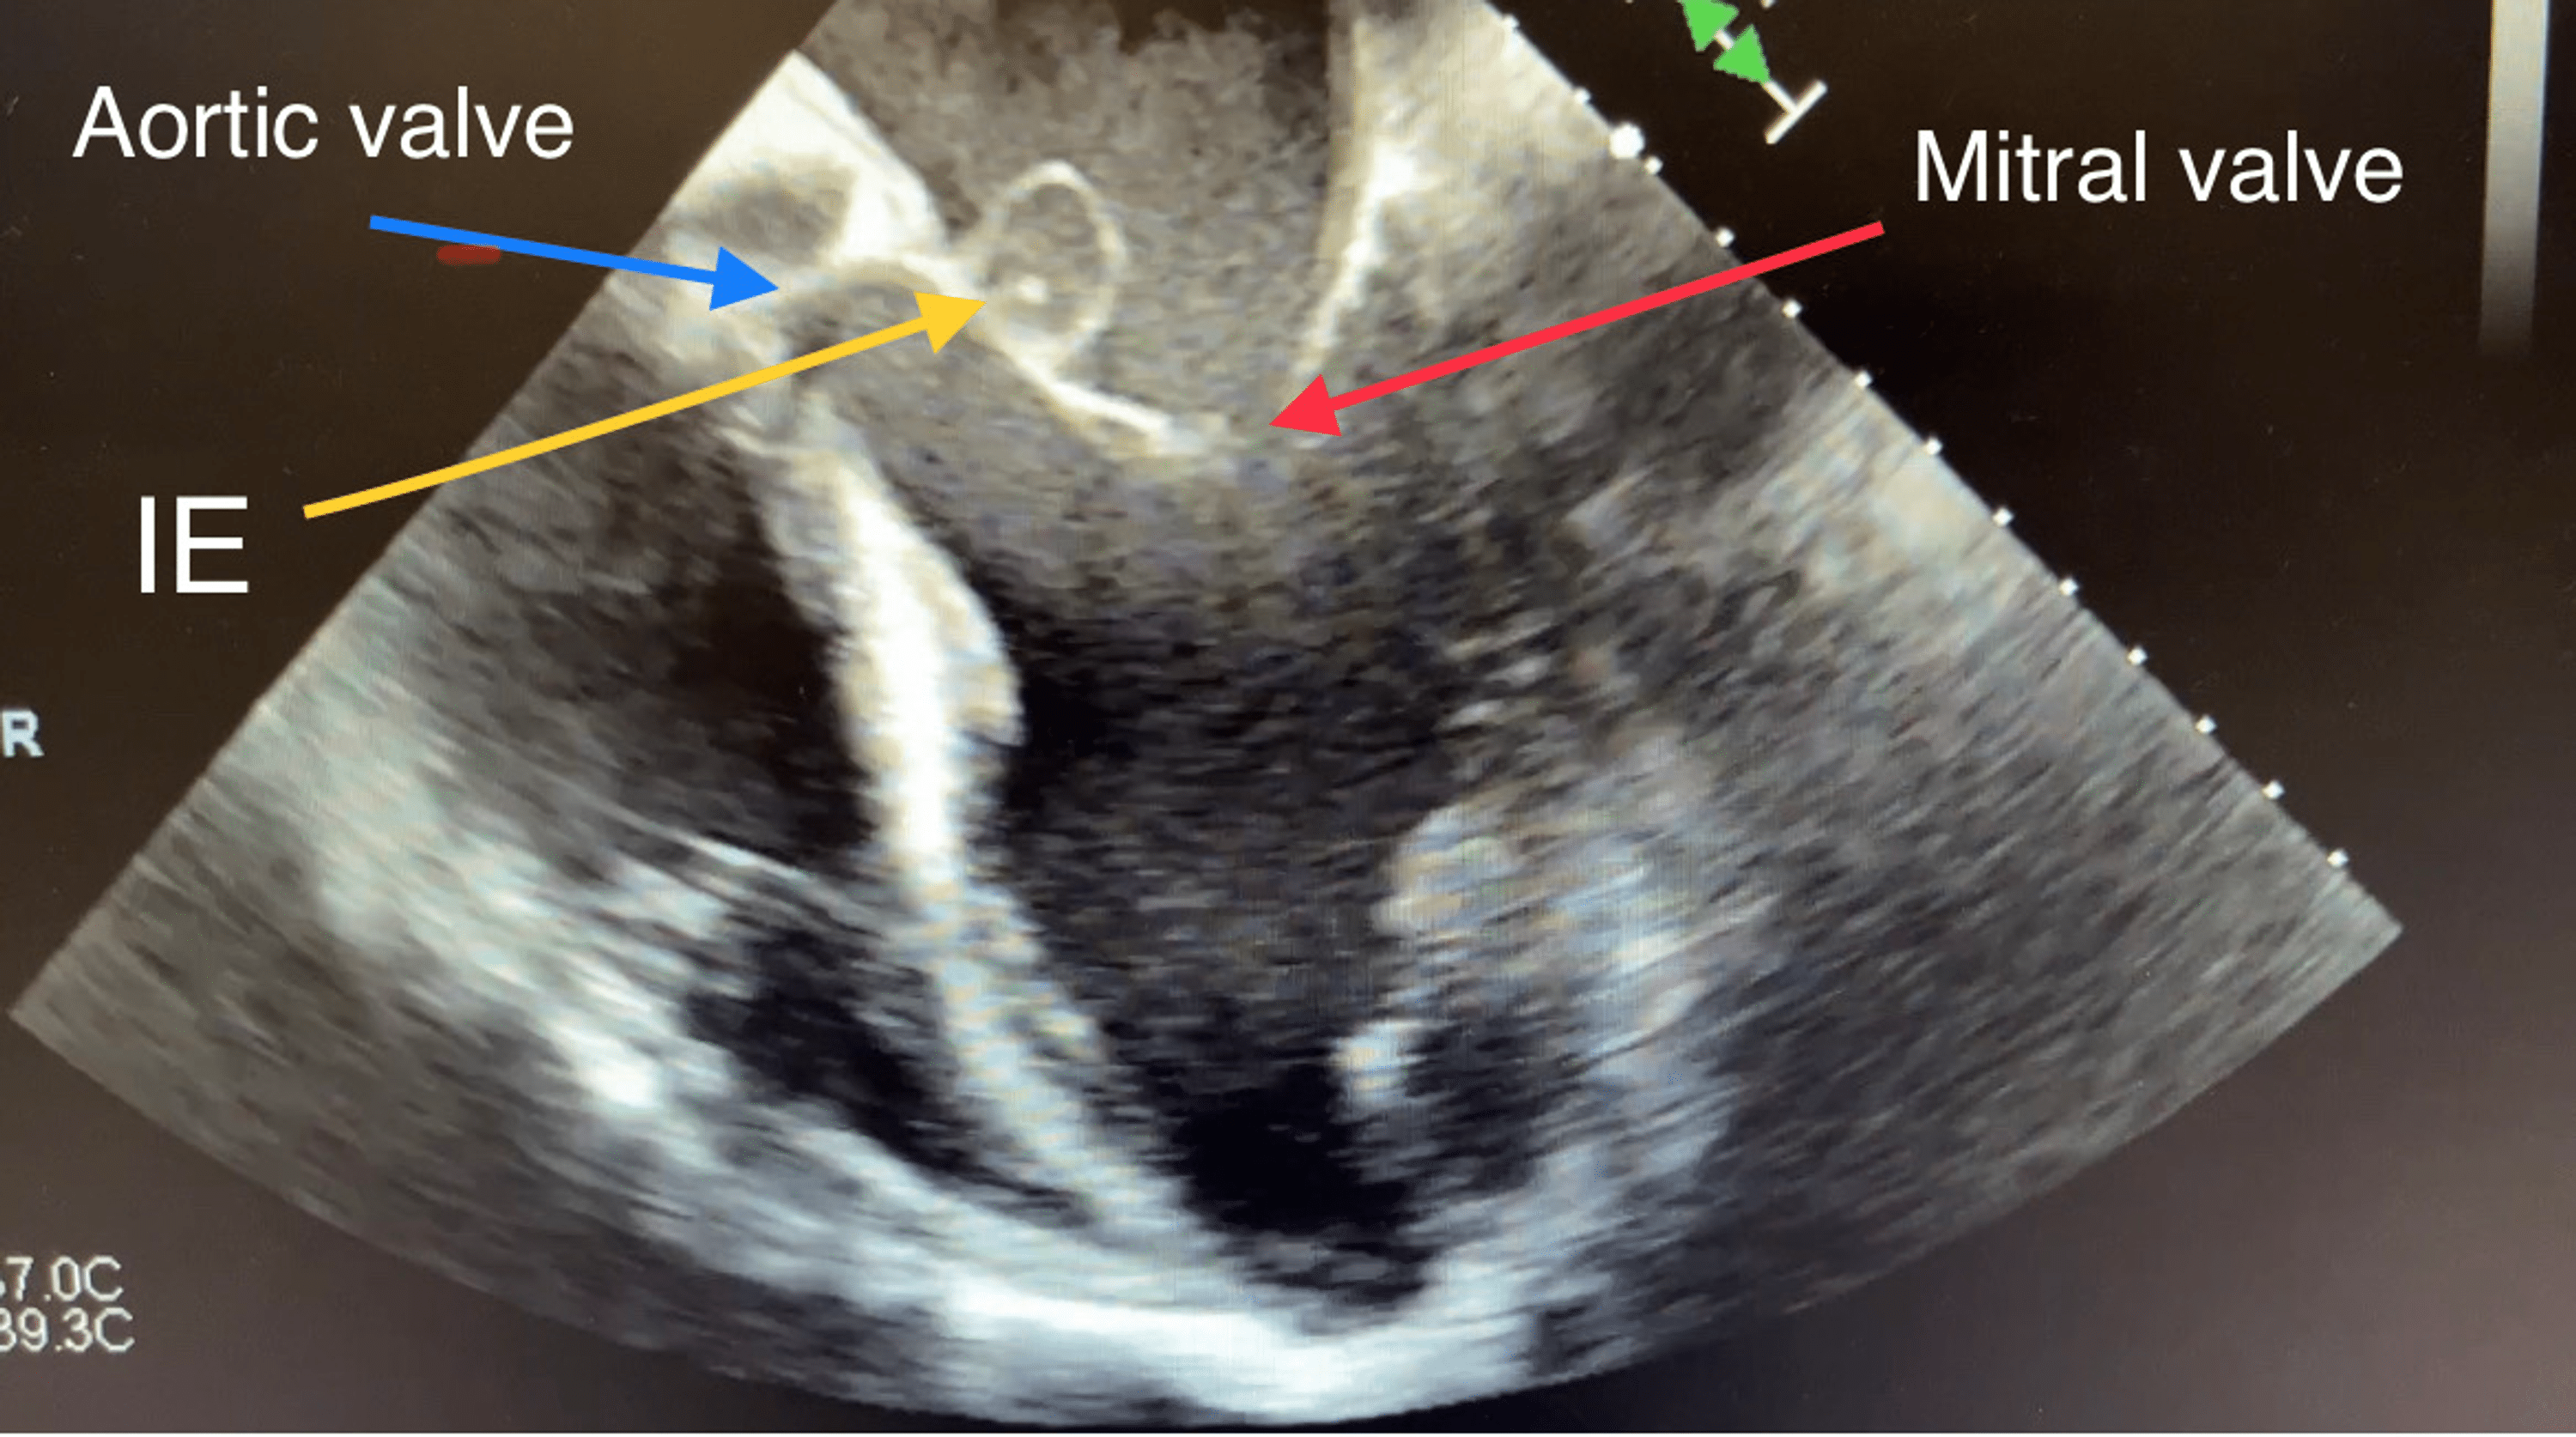 Cureus Aortic And Mitral Valve Infective Endocarditis Caused By Gemella Sanguinis